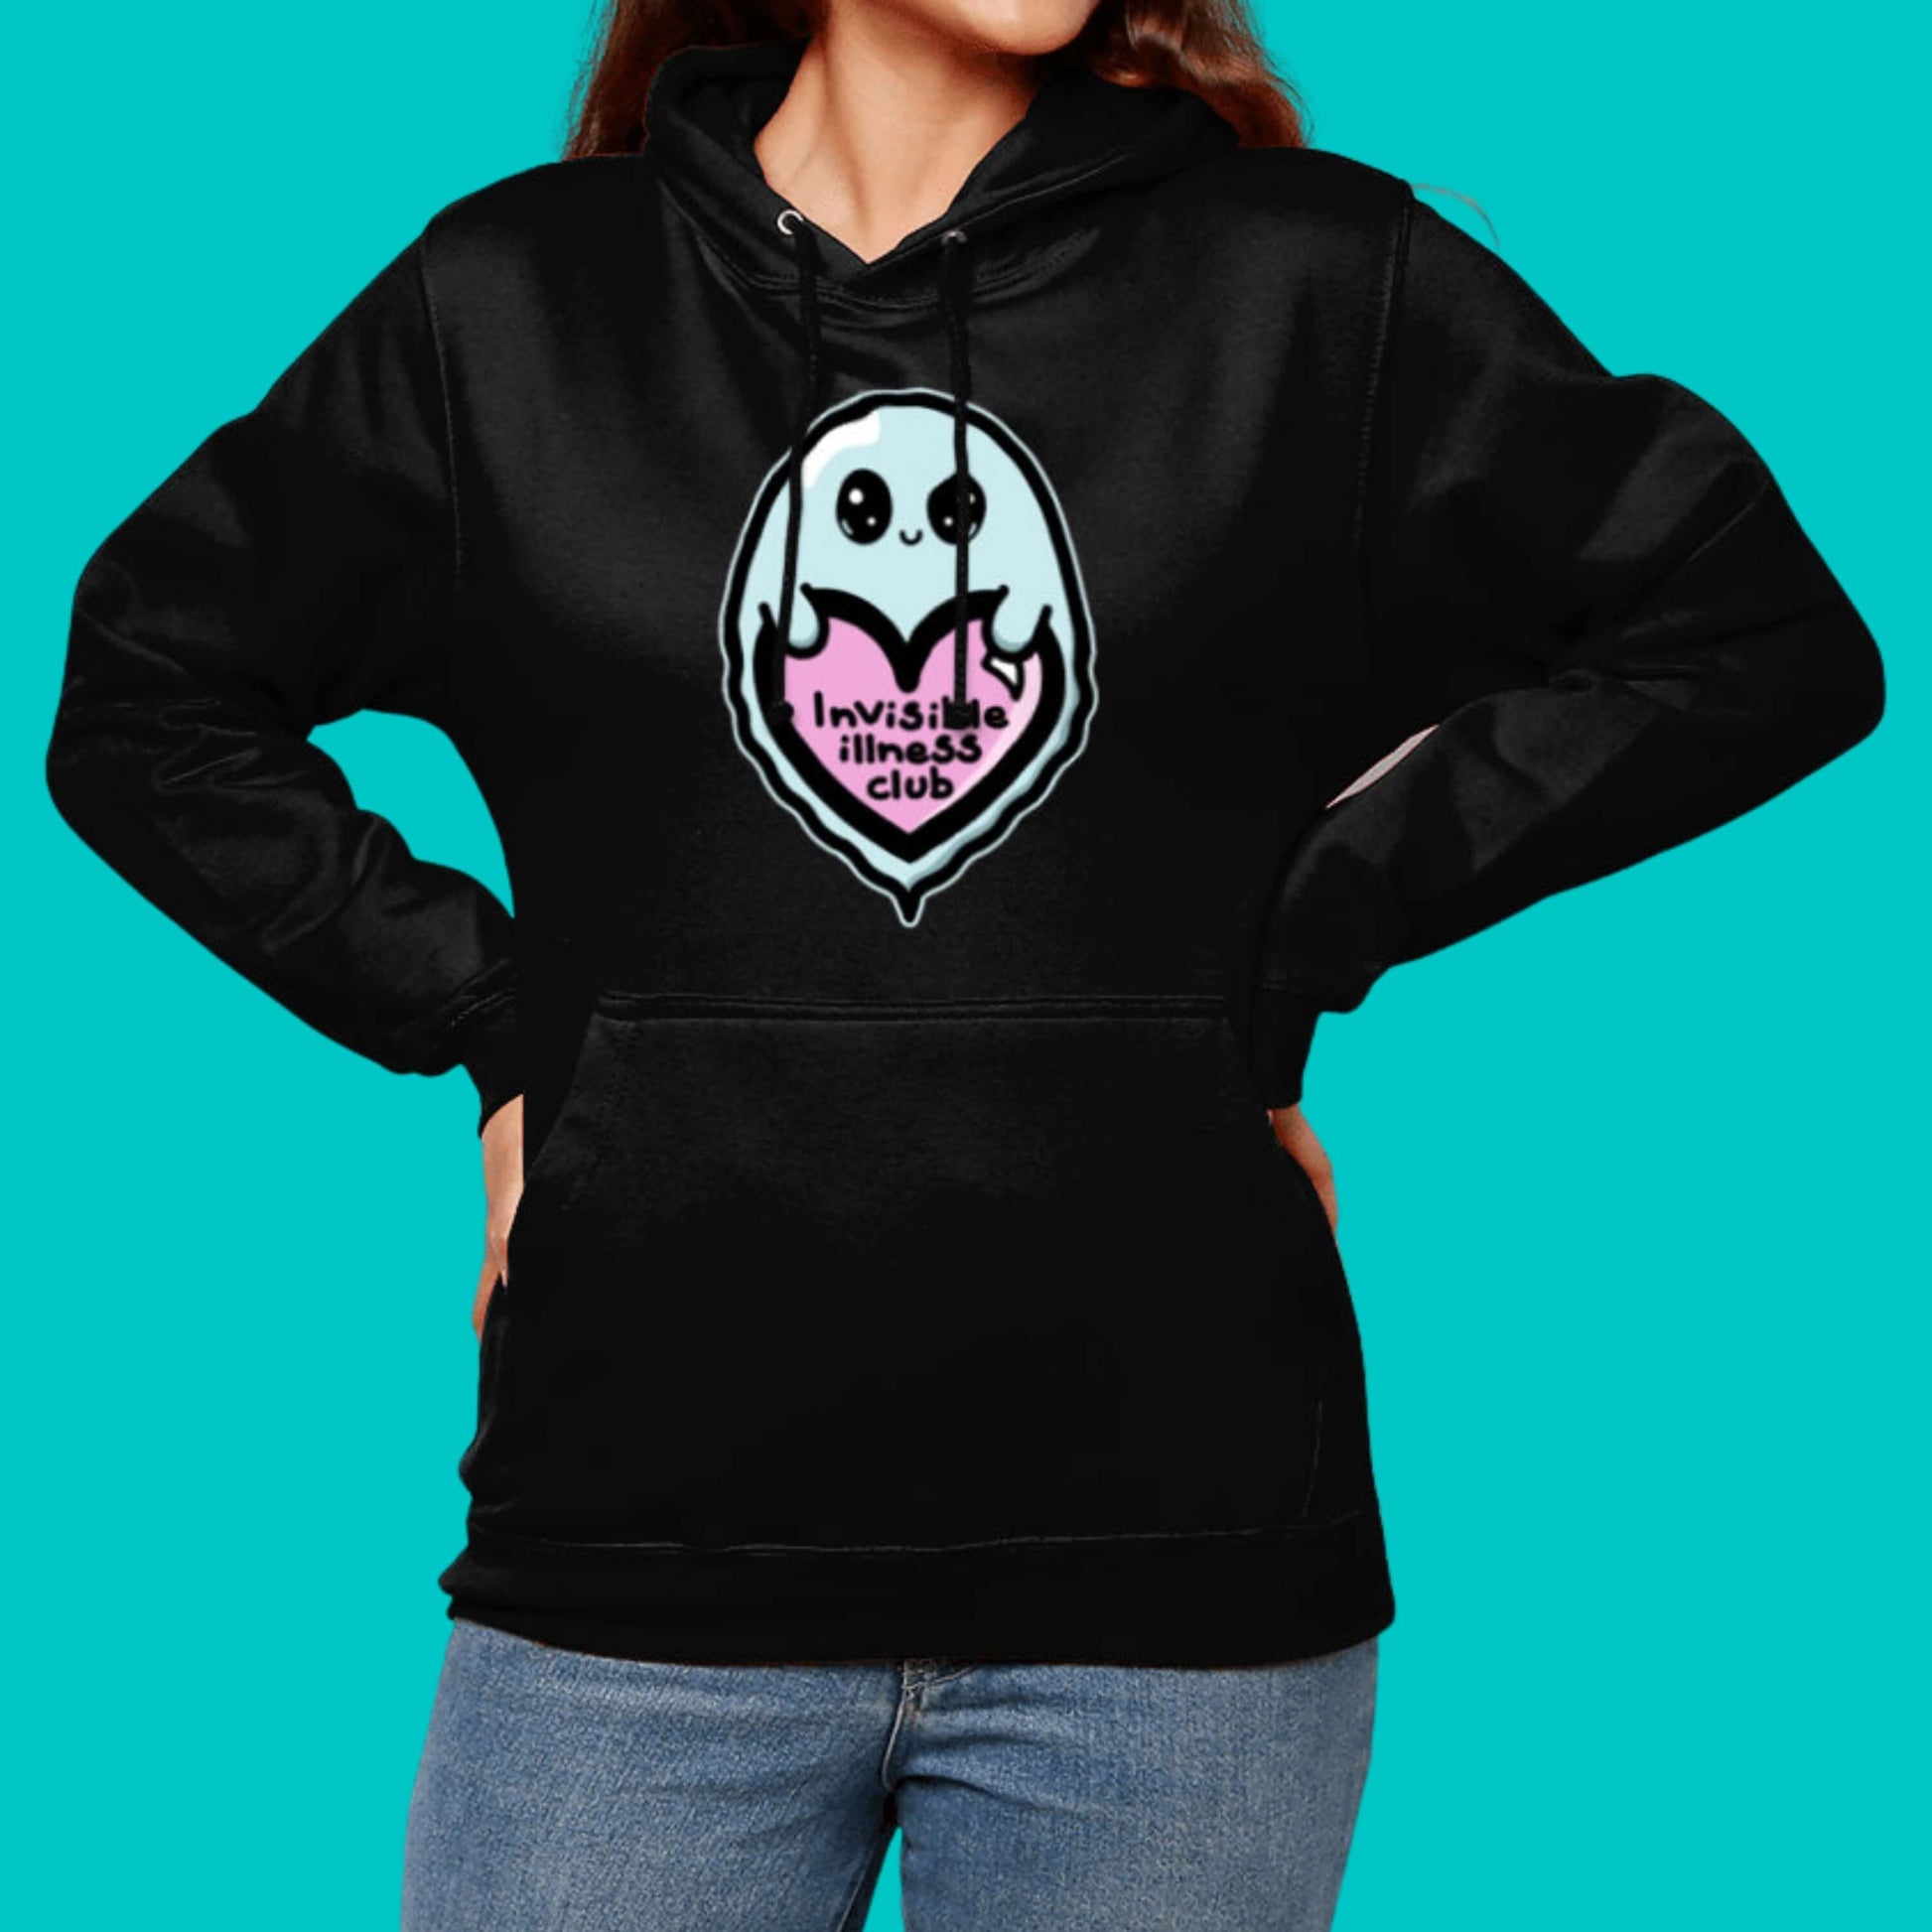 The Invisible Illness Club Black Hoodie modelled on a femme person with brown hair pairing the hoodie with blue denim jeans on a blue background. The black hoodie has a pastel blue smiling ghost with big sparkly eyes holding up a pastel pink heart with black text reading 'invisible illness club'. The hoodie has a large front pocket and black drawstring hood. The hand drawn design is raising awareness for hidden disabilites.